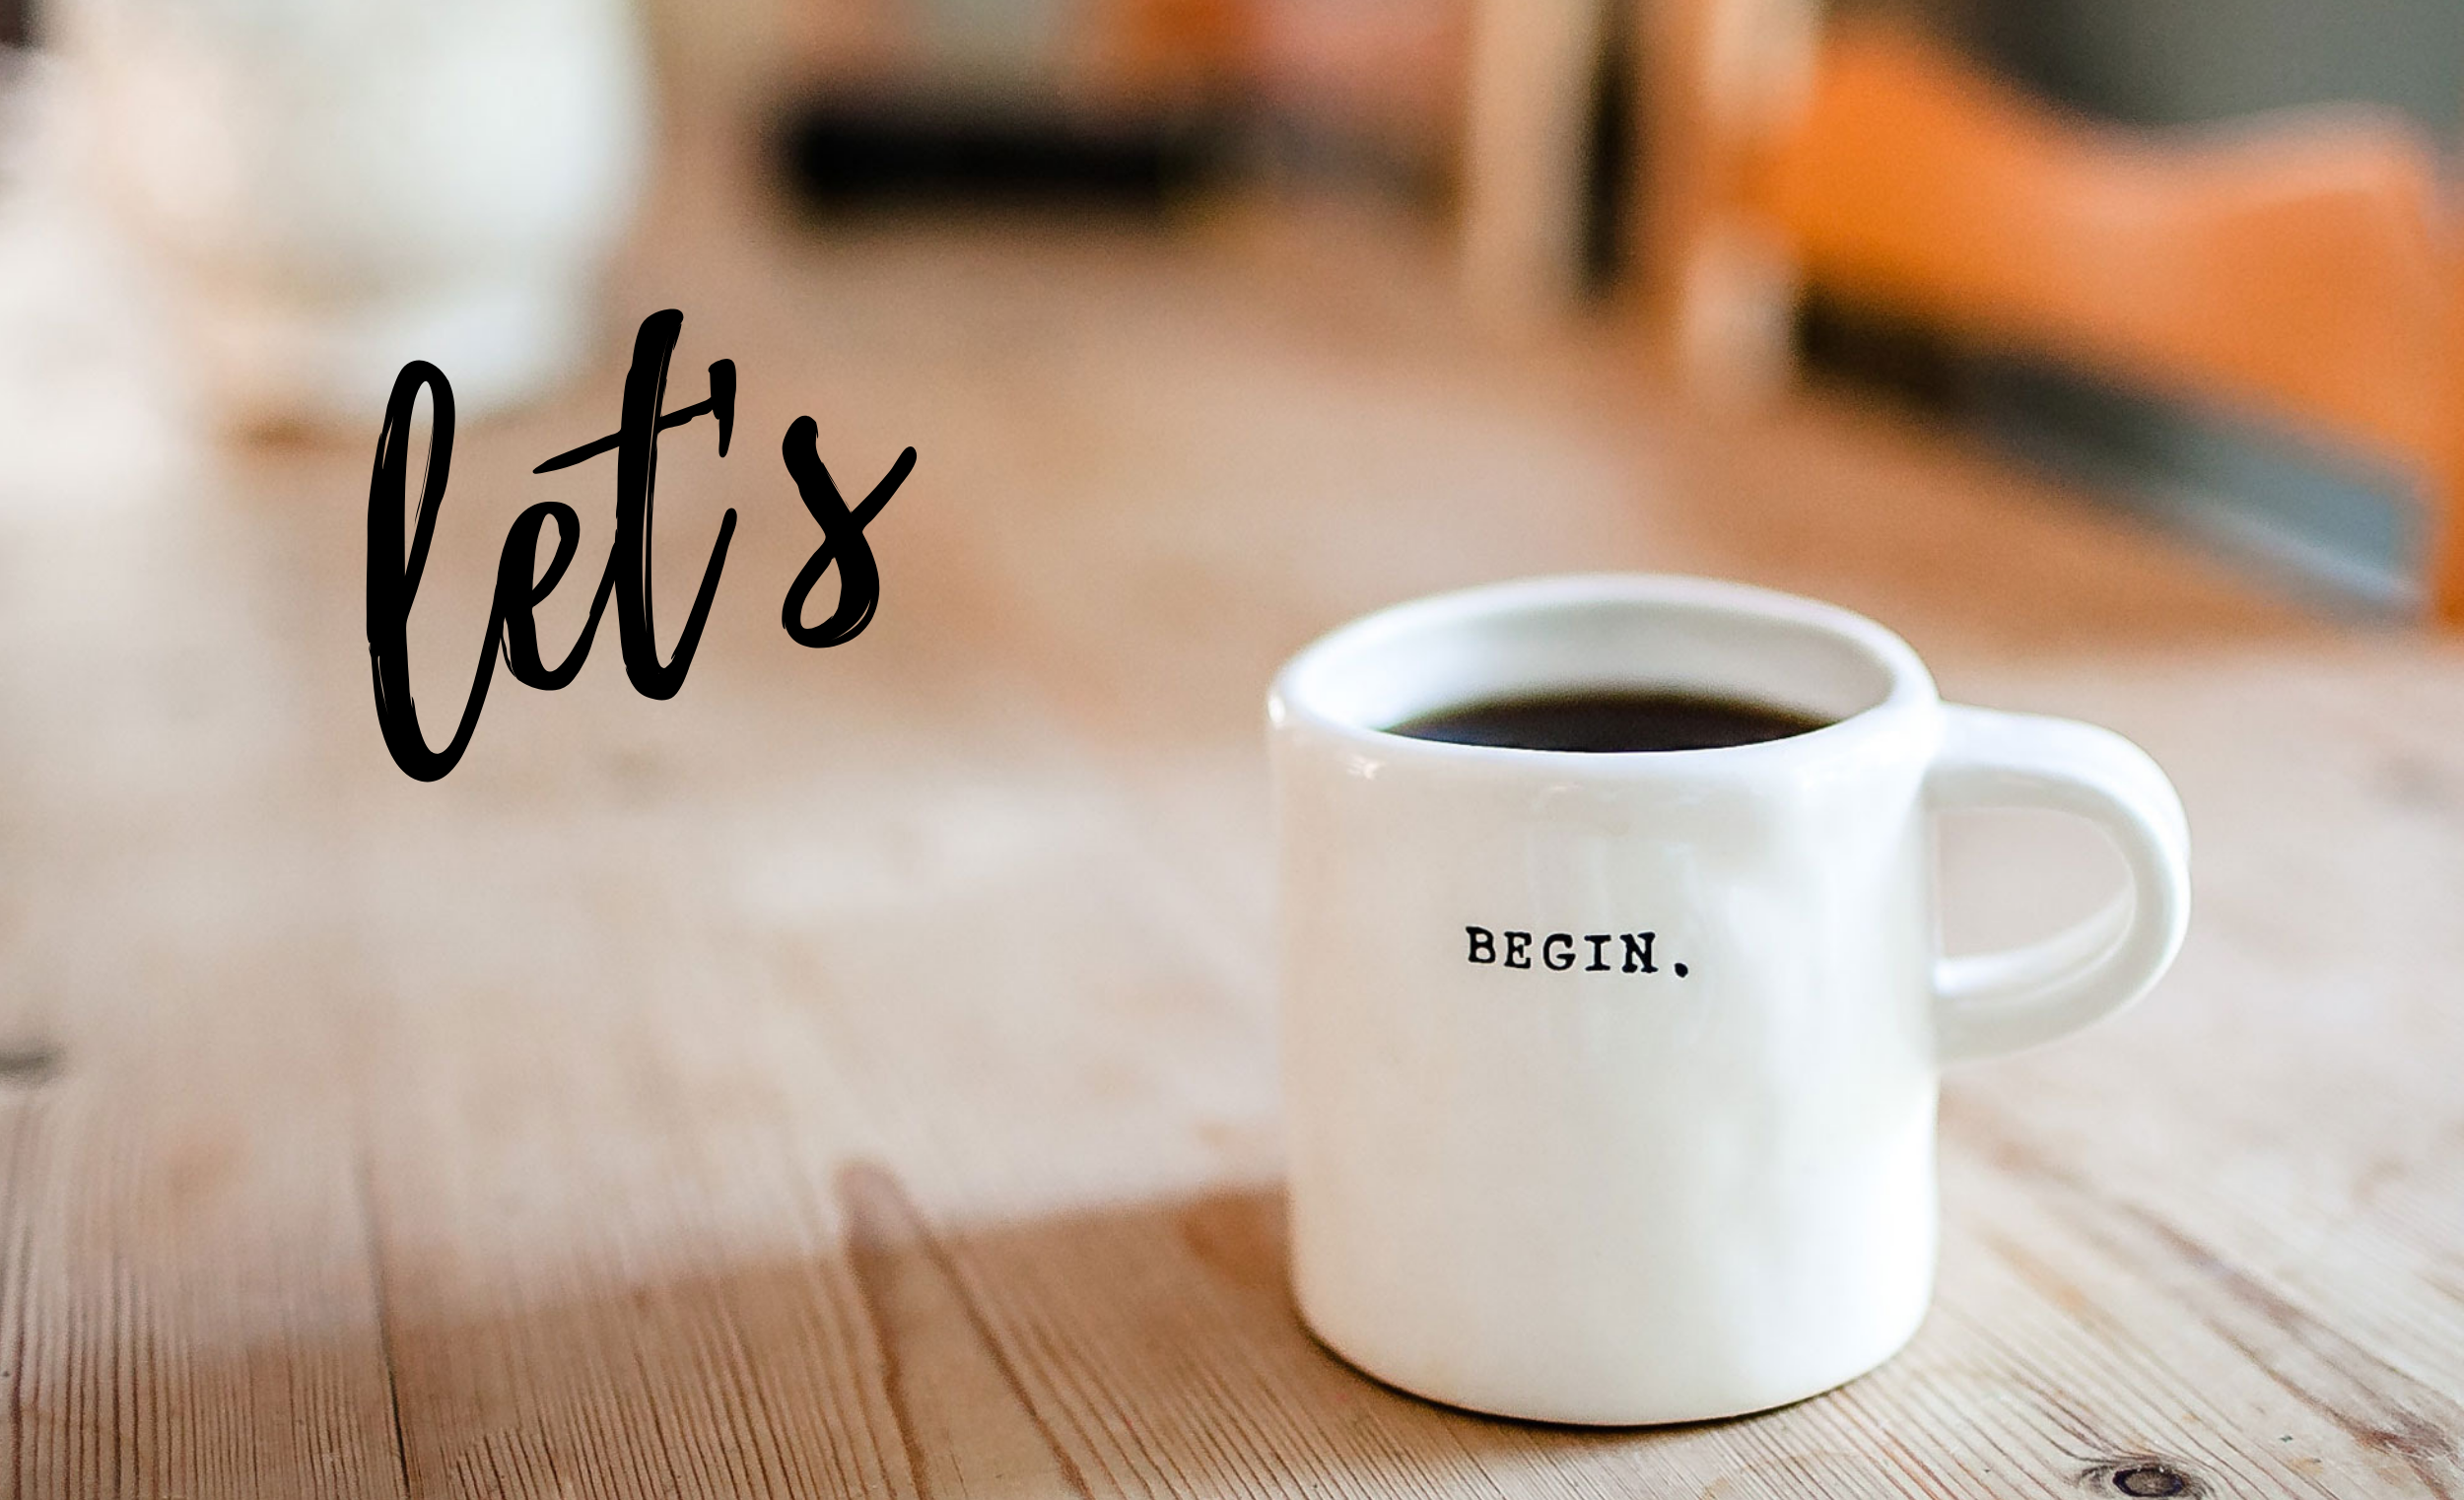 A coffee mug on the table with the word 'begin' written on the side